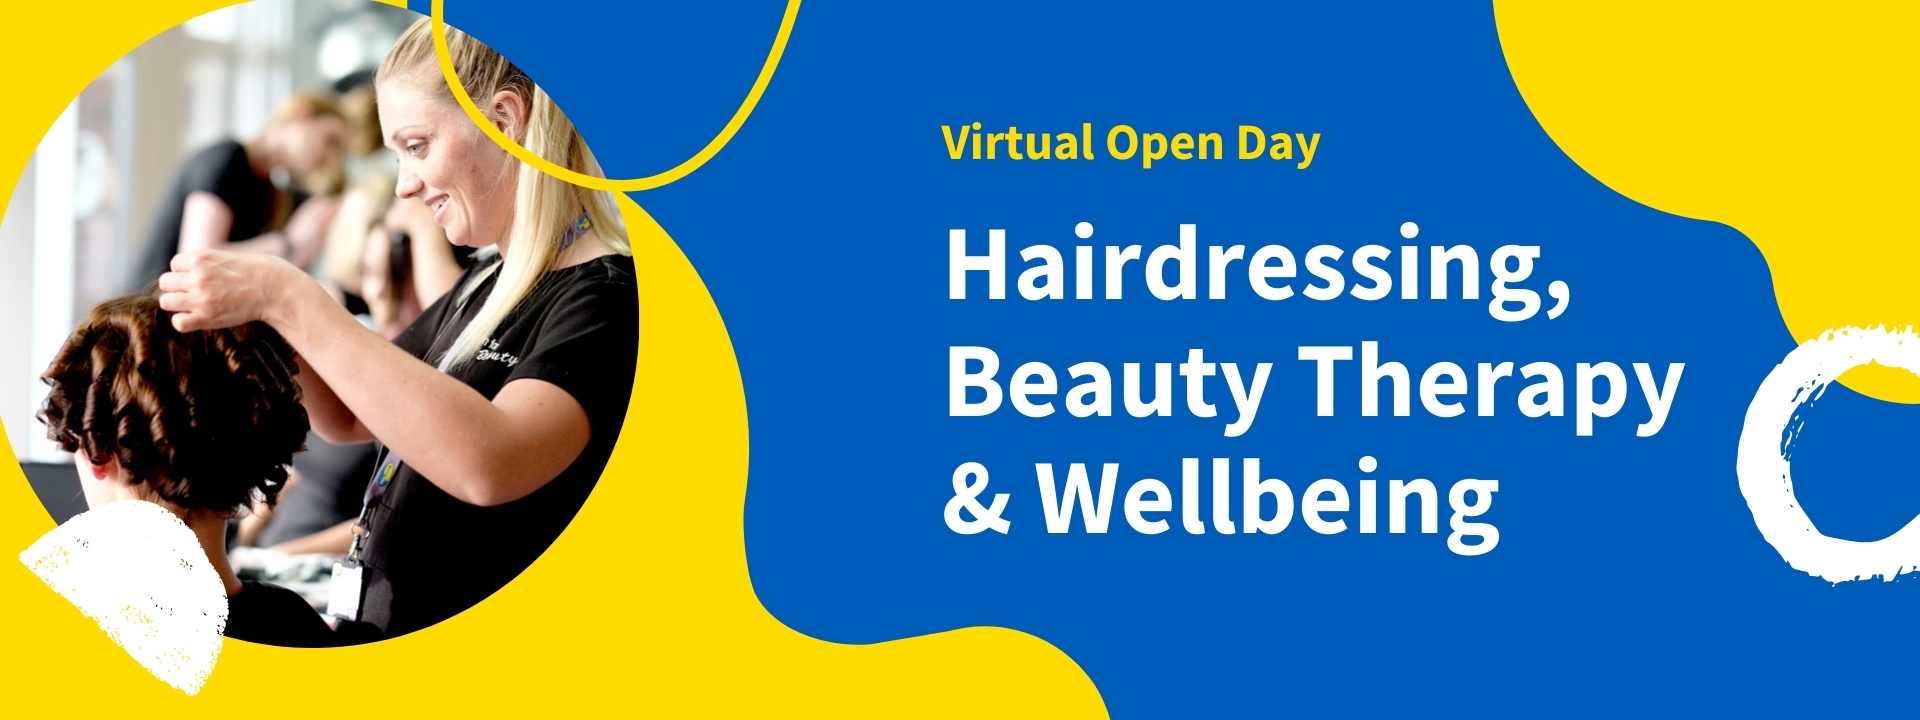 Hairdressing, Beauty Therapy & Wellbeing Banner